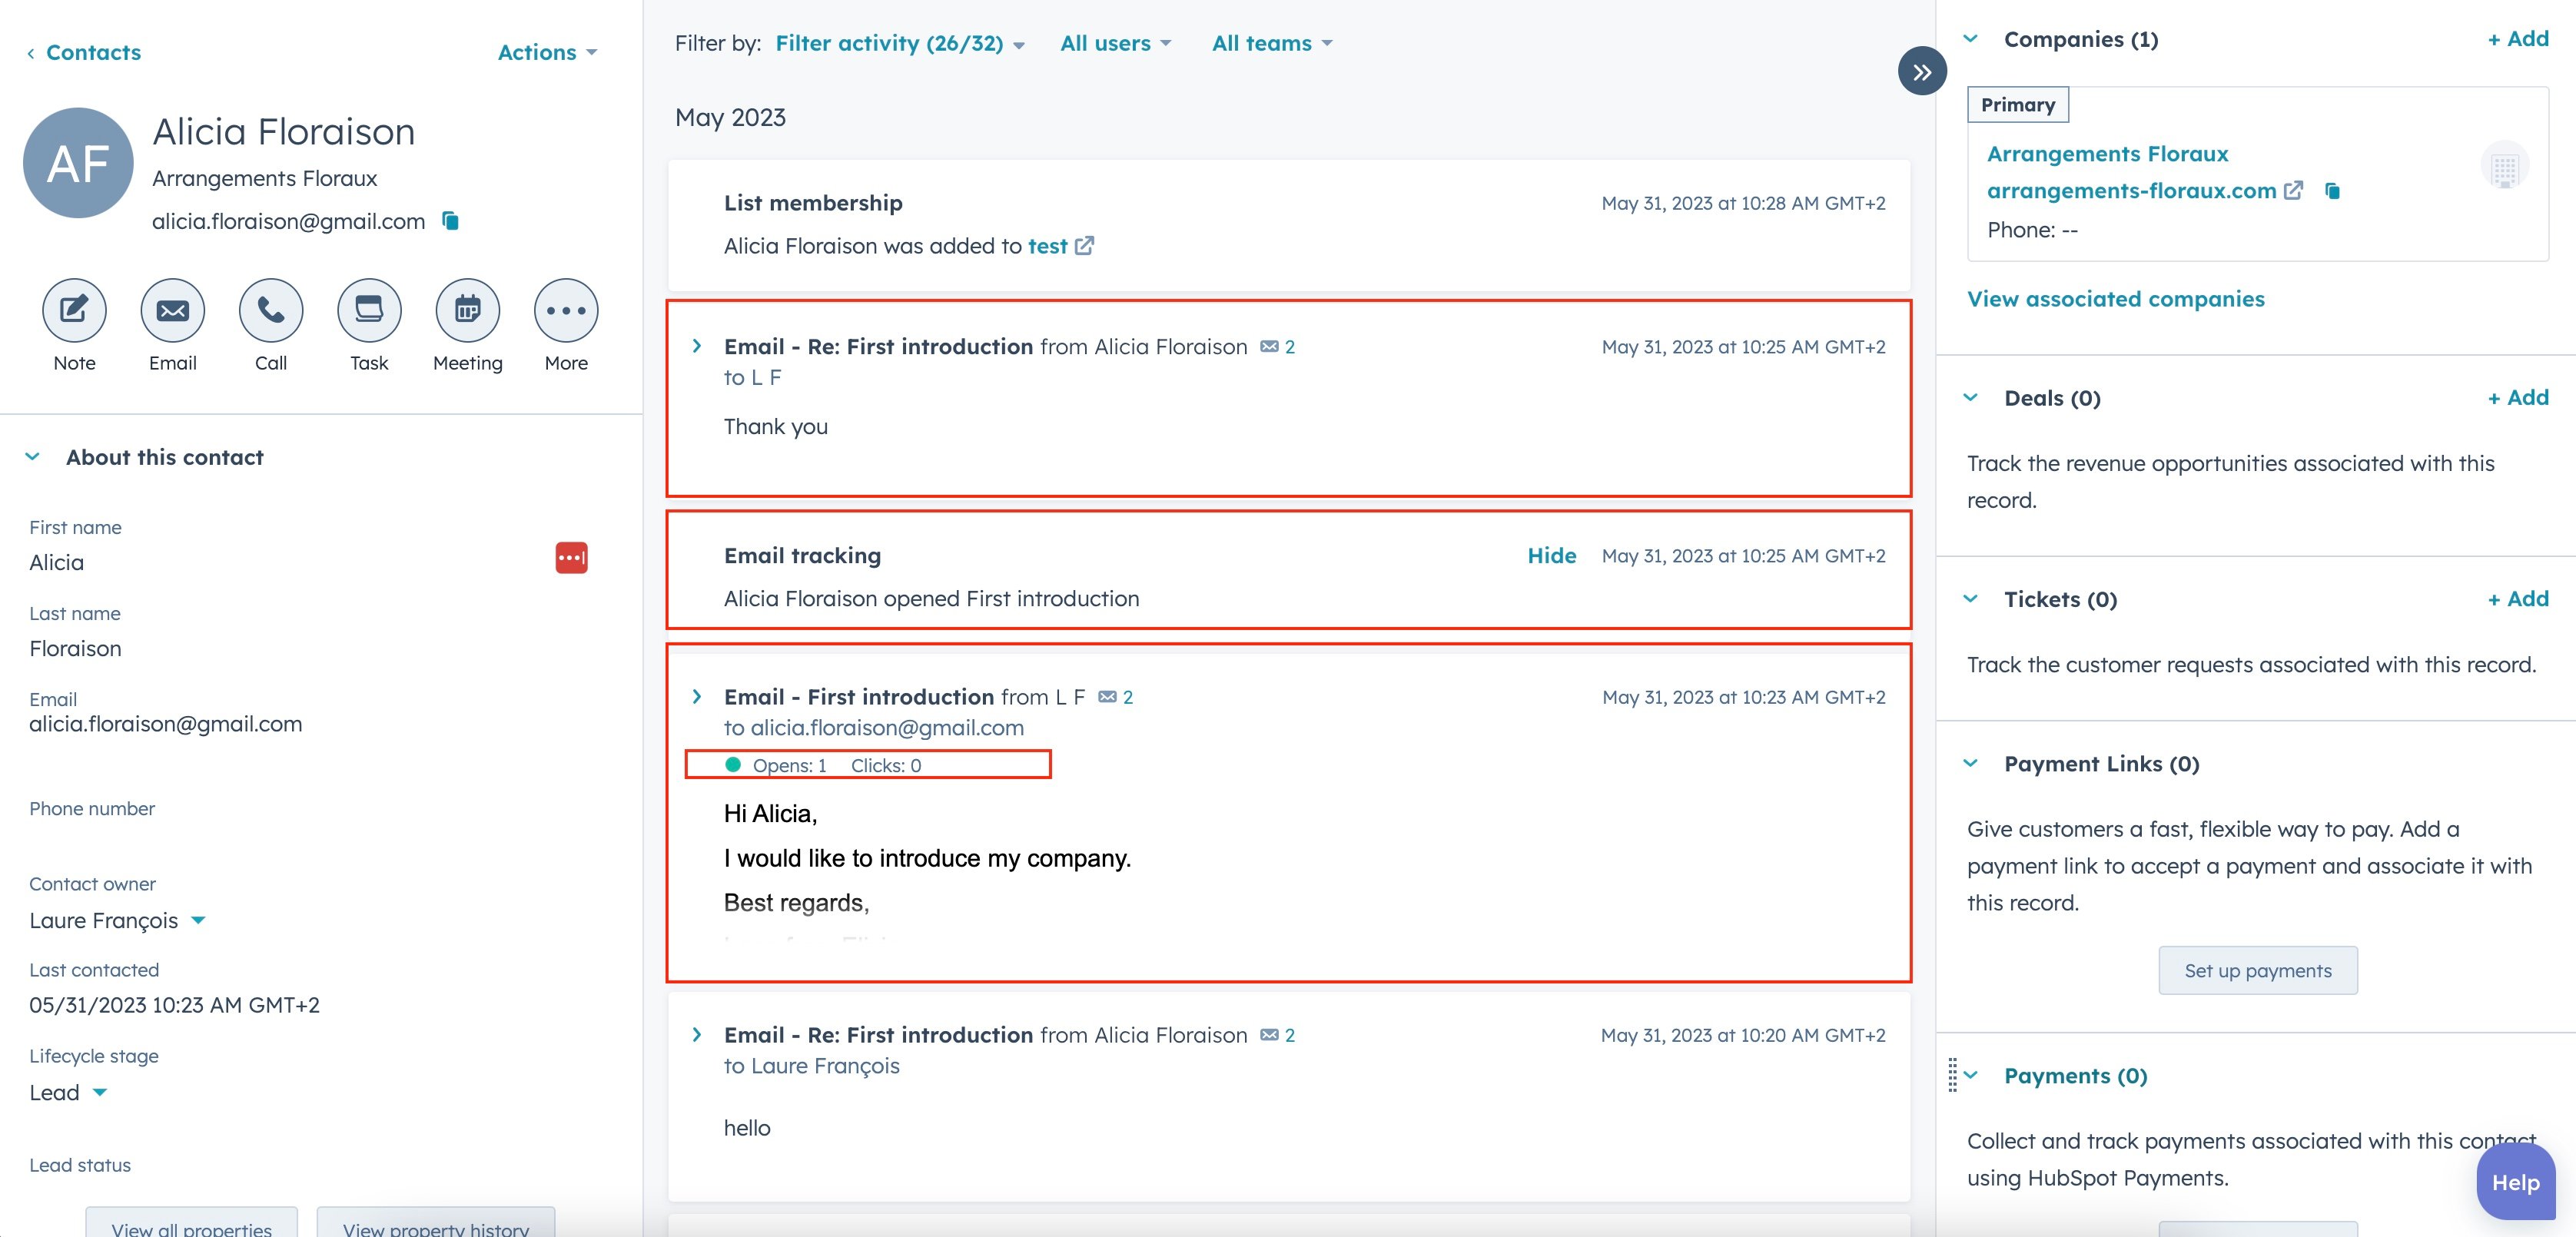  screenshot showcasing the contact record in HubSpot, highlighting the email interactions, and the tracking information.  